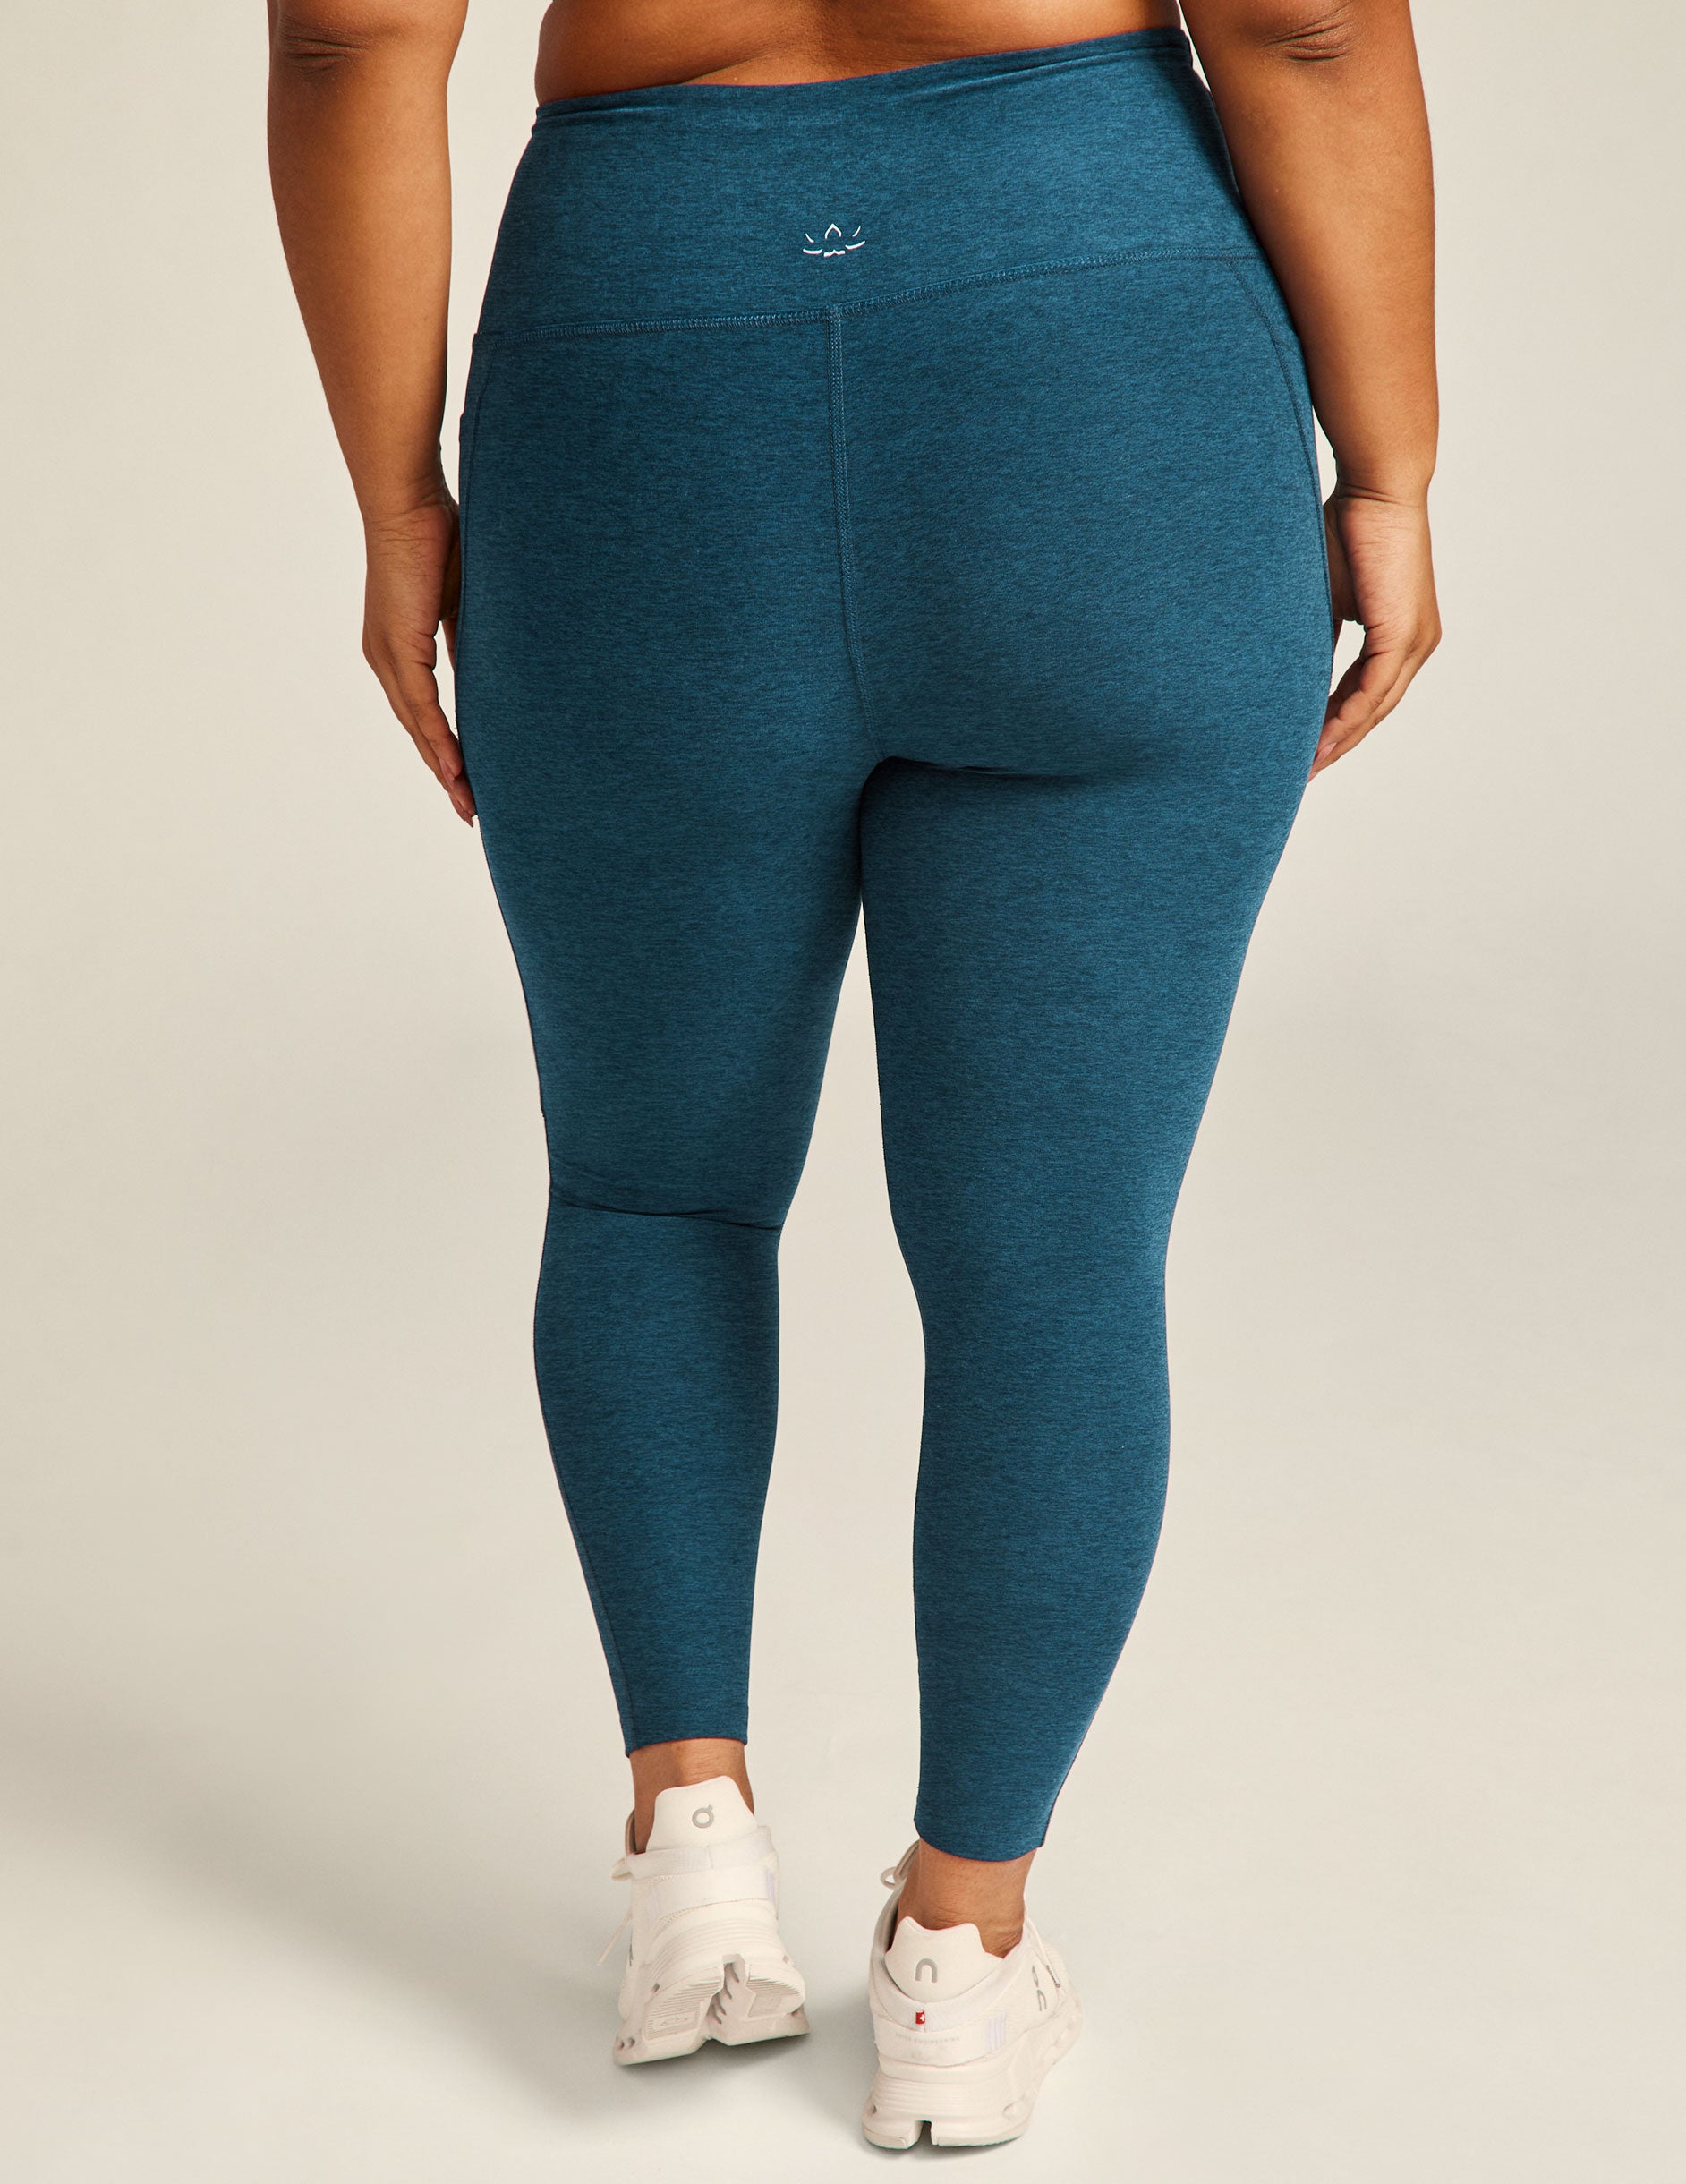 Advantage Petite Leggings with Pockets in Ice Blue